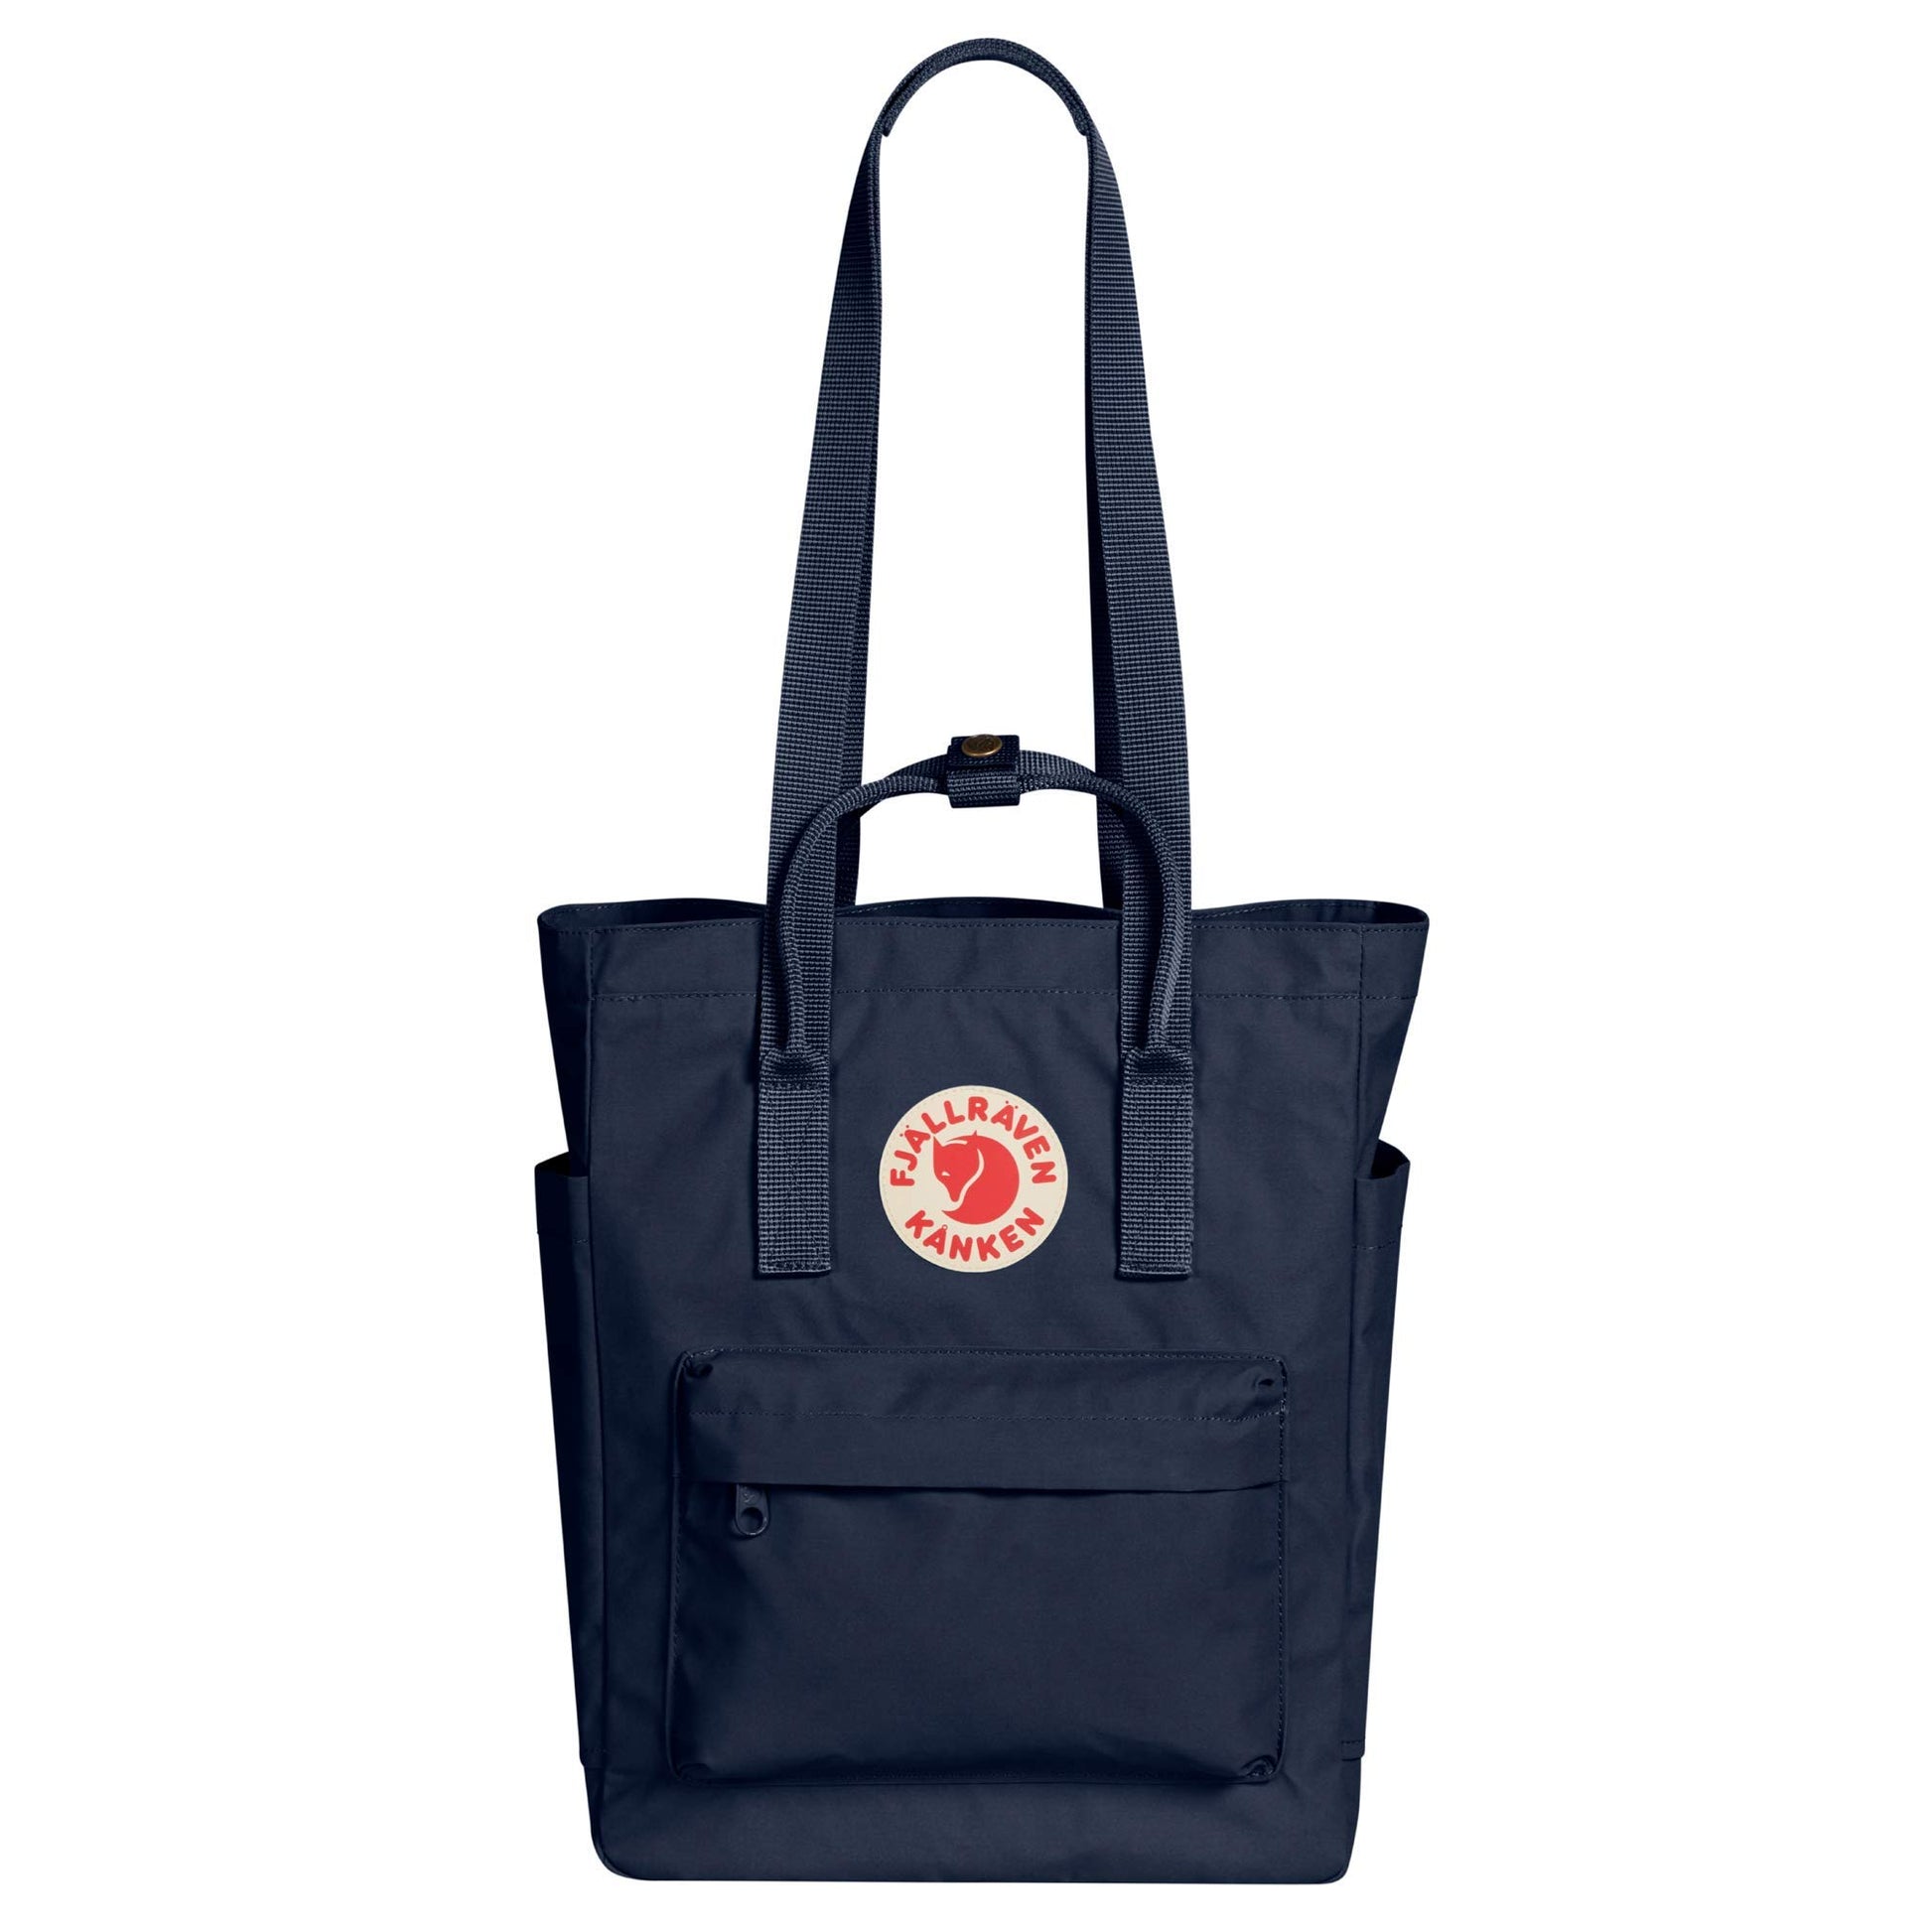 Fjallraven, Kanken Totepack Backpack with 13" Laptop Sleeve for Everyday Use and Travel